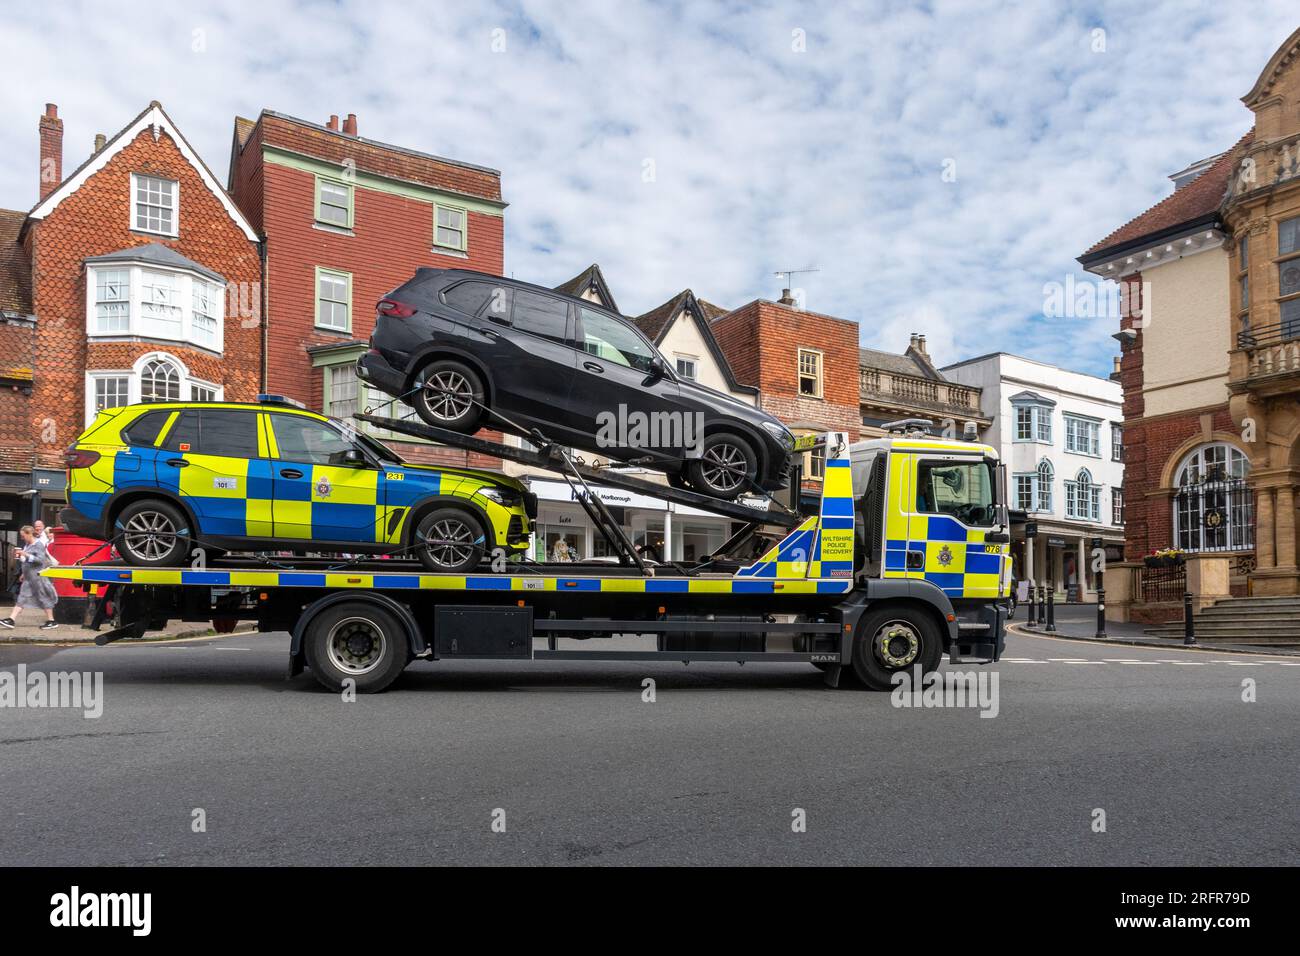 A police recovery vehicle lorry truck driving through Marlborough town centre, Wiltshire, England, UK, transporting an impounded car Stock Photo